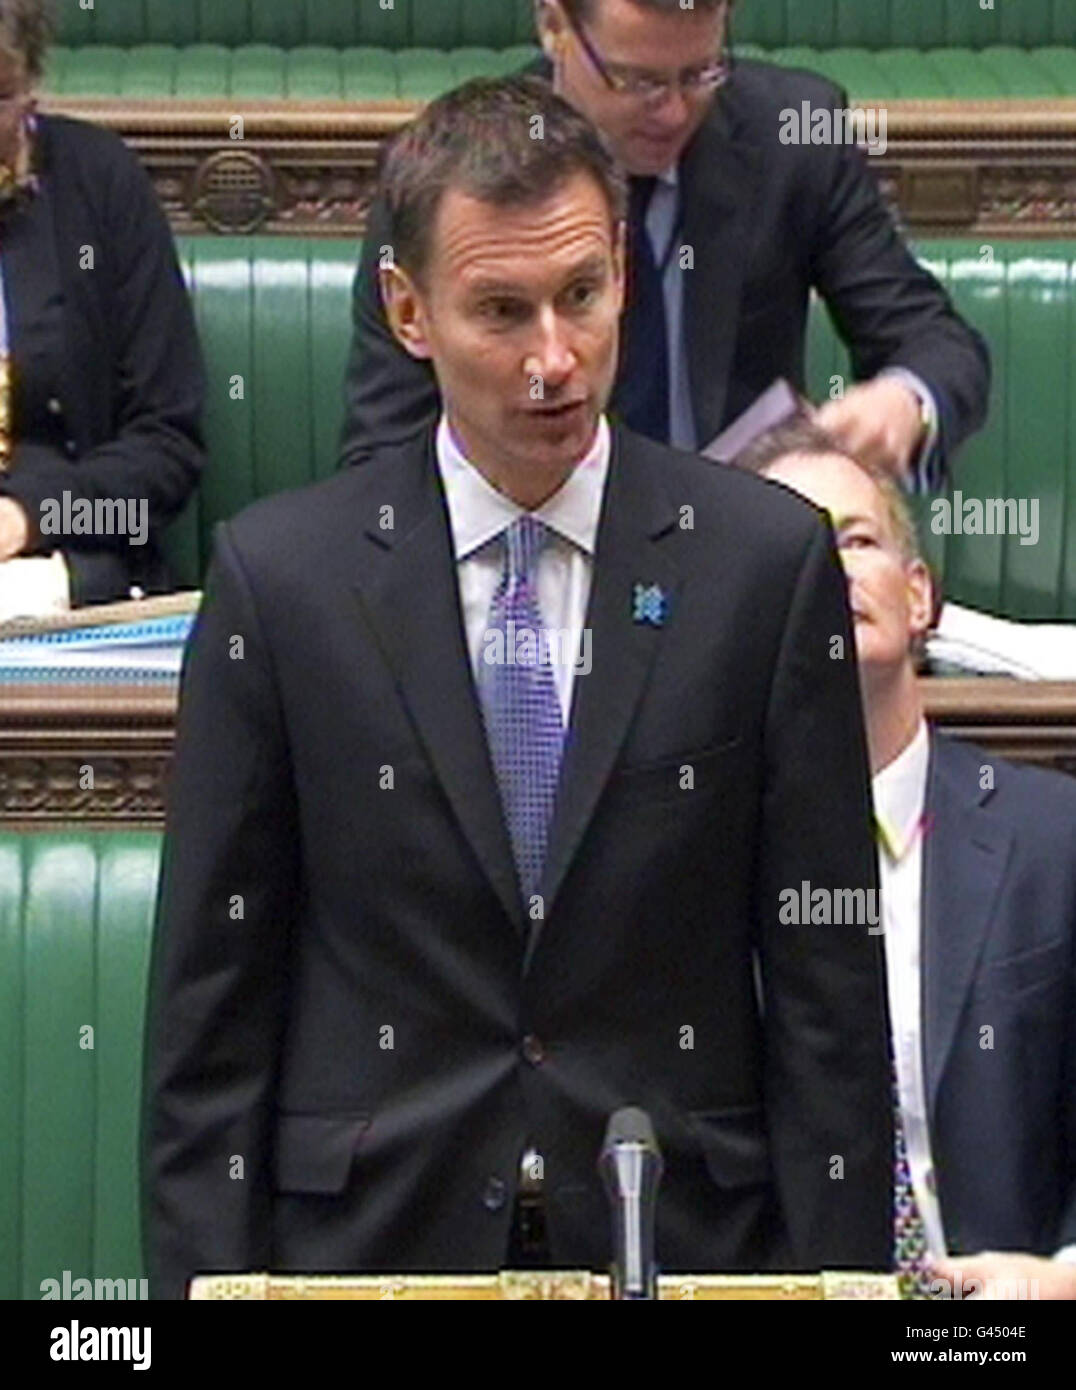 Culture Secretary Jeremy Hunt speaks during Culture, Olympics, Media and Sport Questions in the House of Commons, London. Mr Hunt has said he intends to accept News Corp's plans to spin off Sky News to address concerns over its planned takeover of BSkyB. Stock Photo